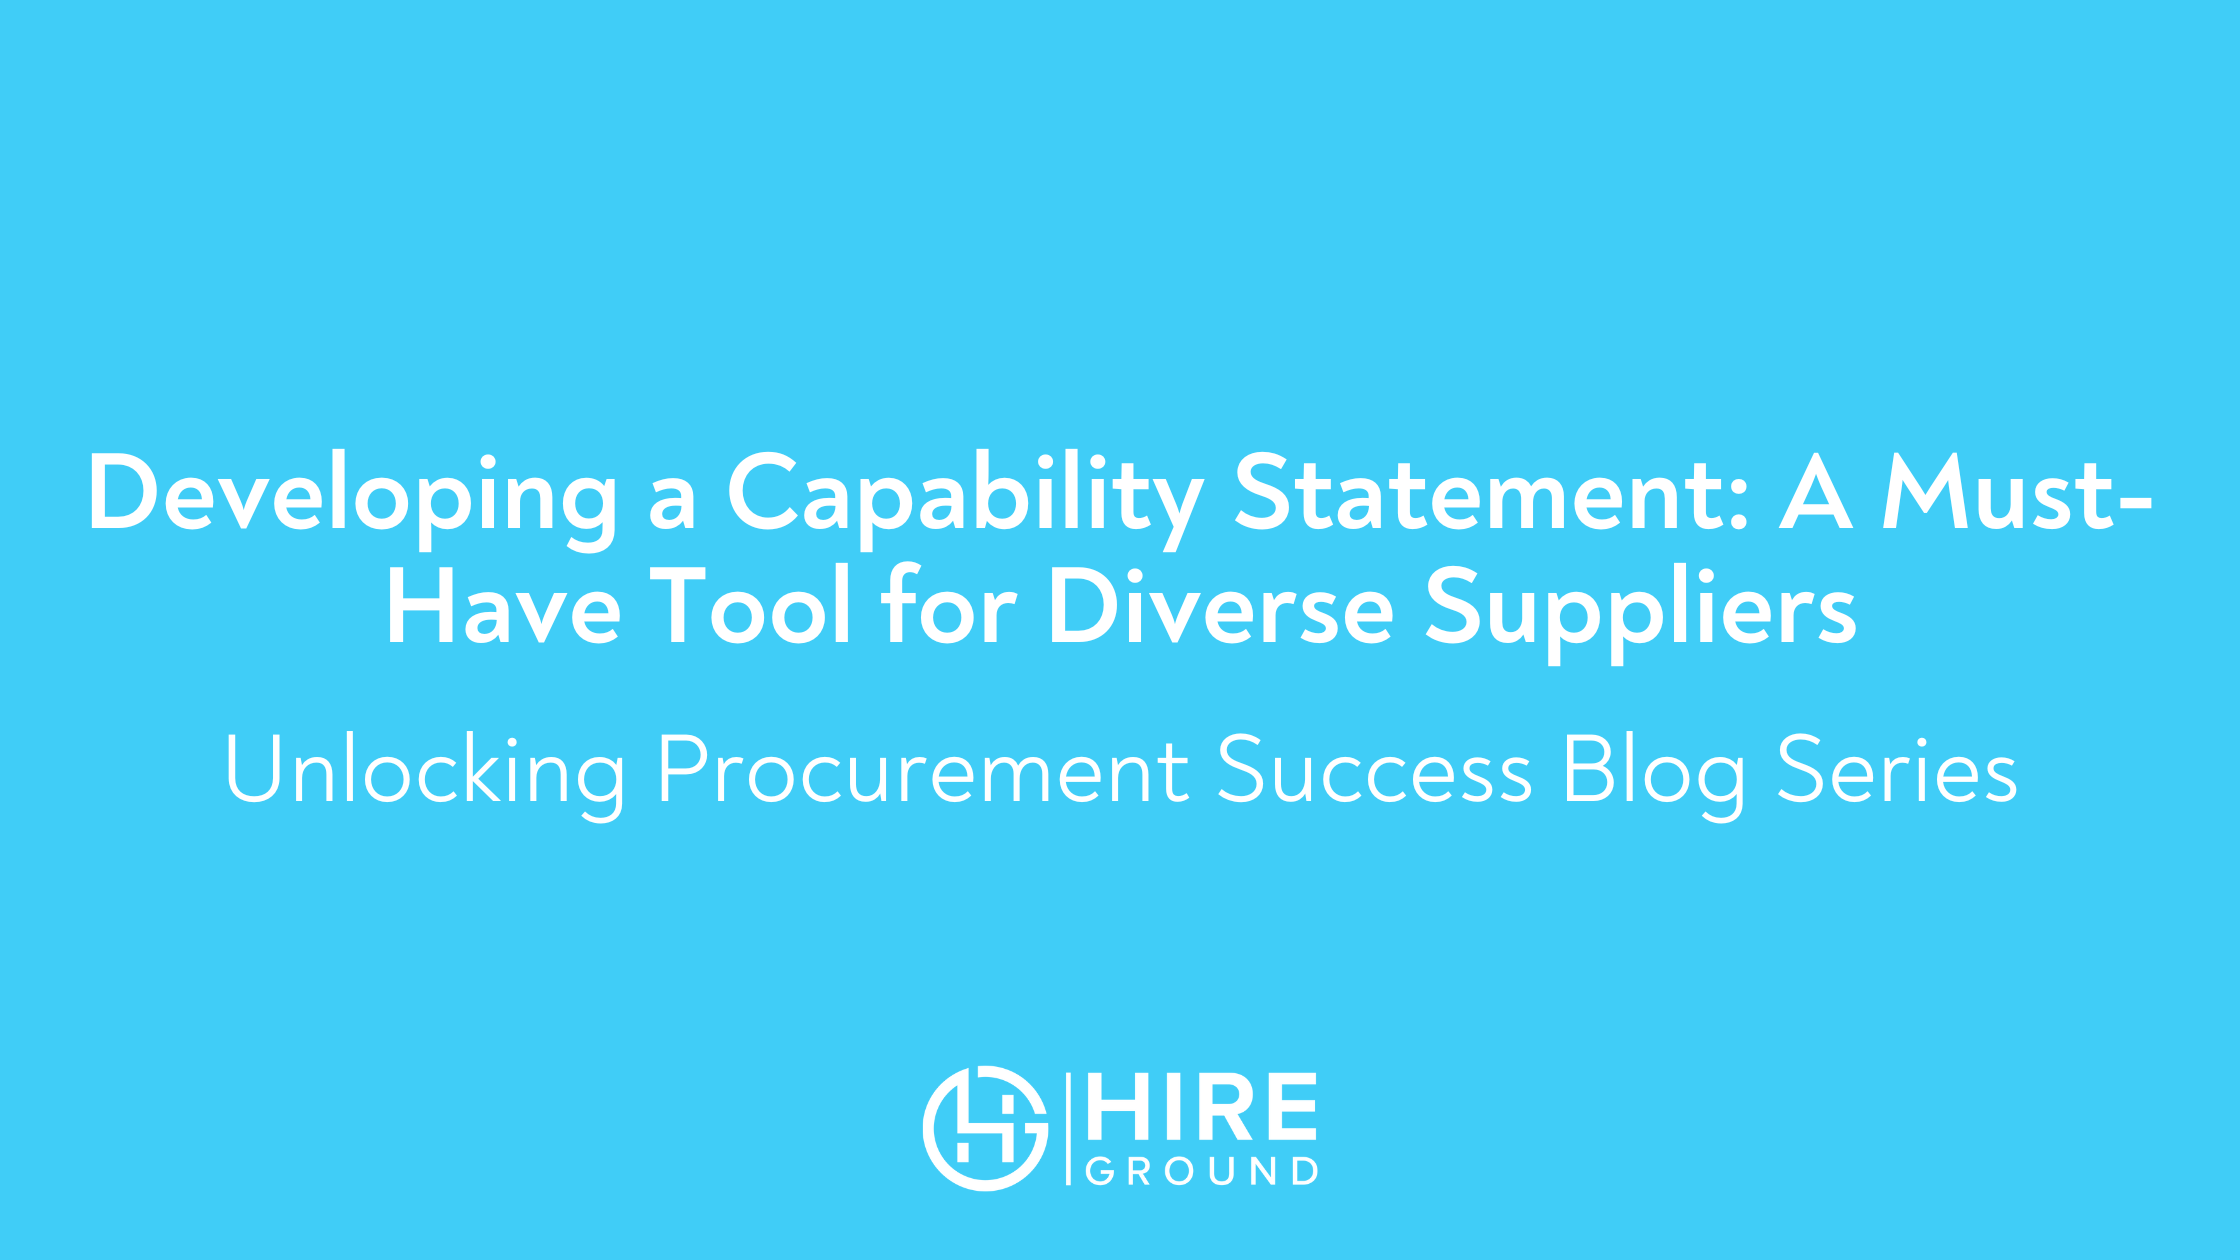 Cover graphic for the blog post: Developing a Capability Statement: A Must-Have Tool for Diverse Suppliers